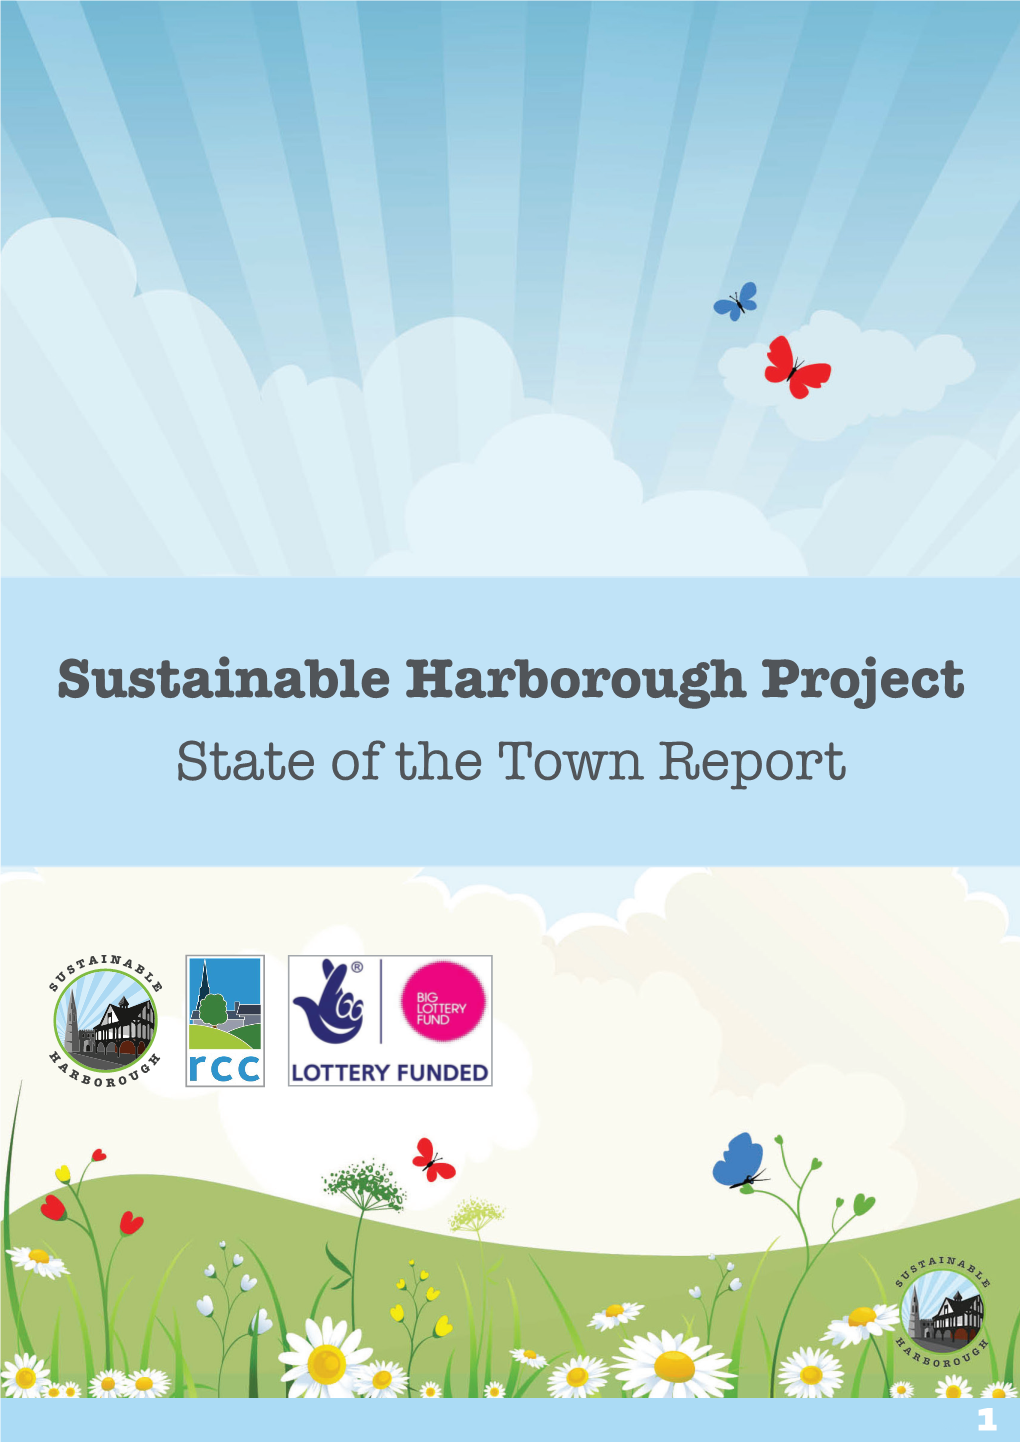 Sustainable Harborough Project State of the Town Report